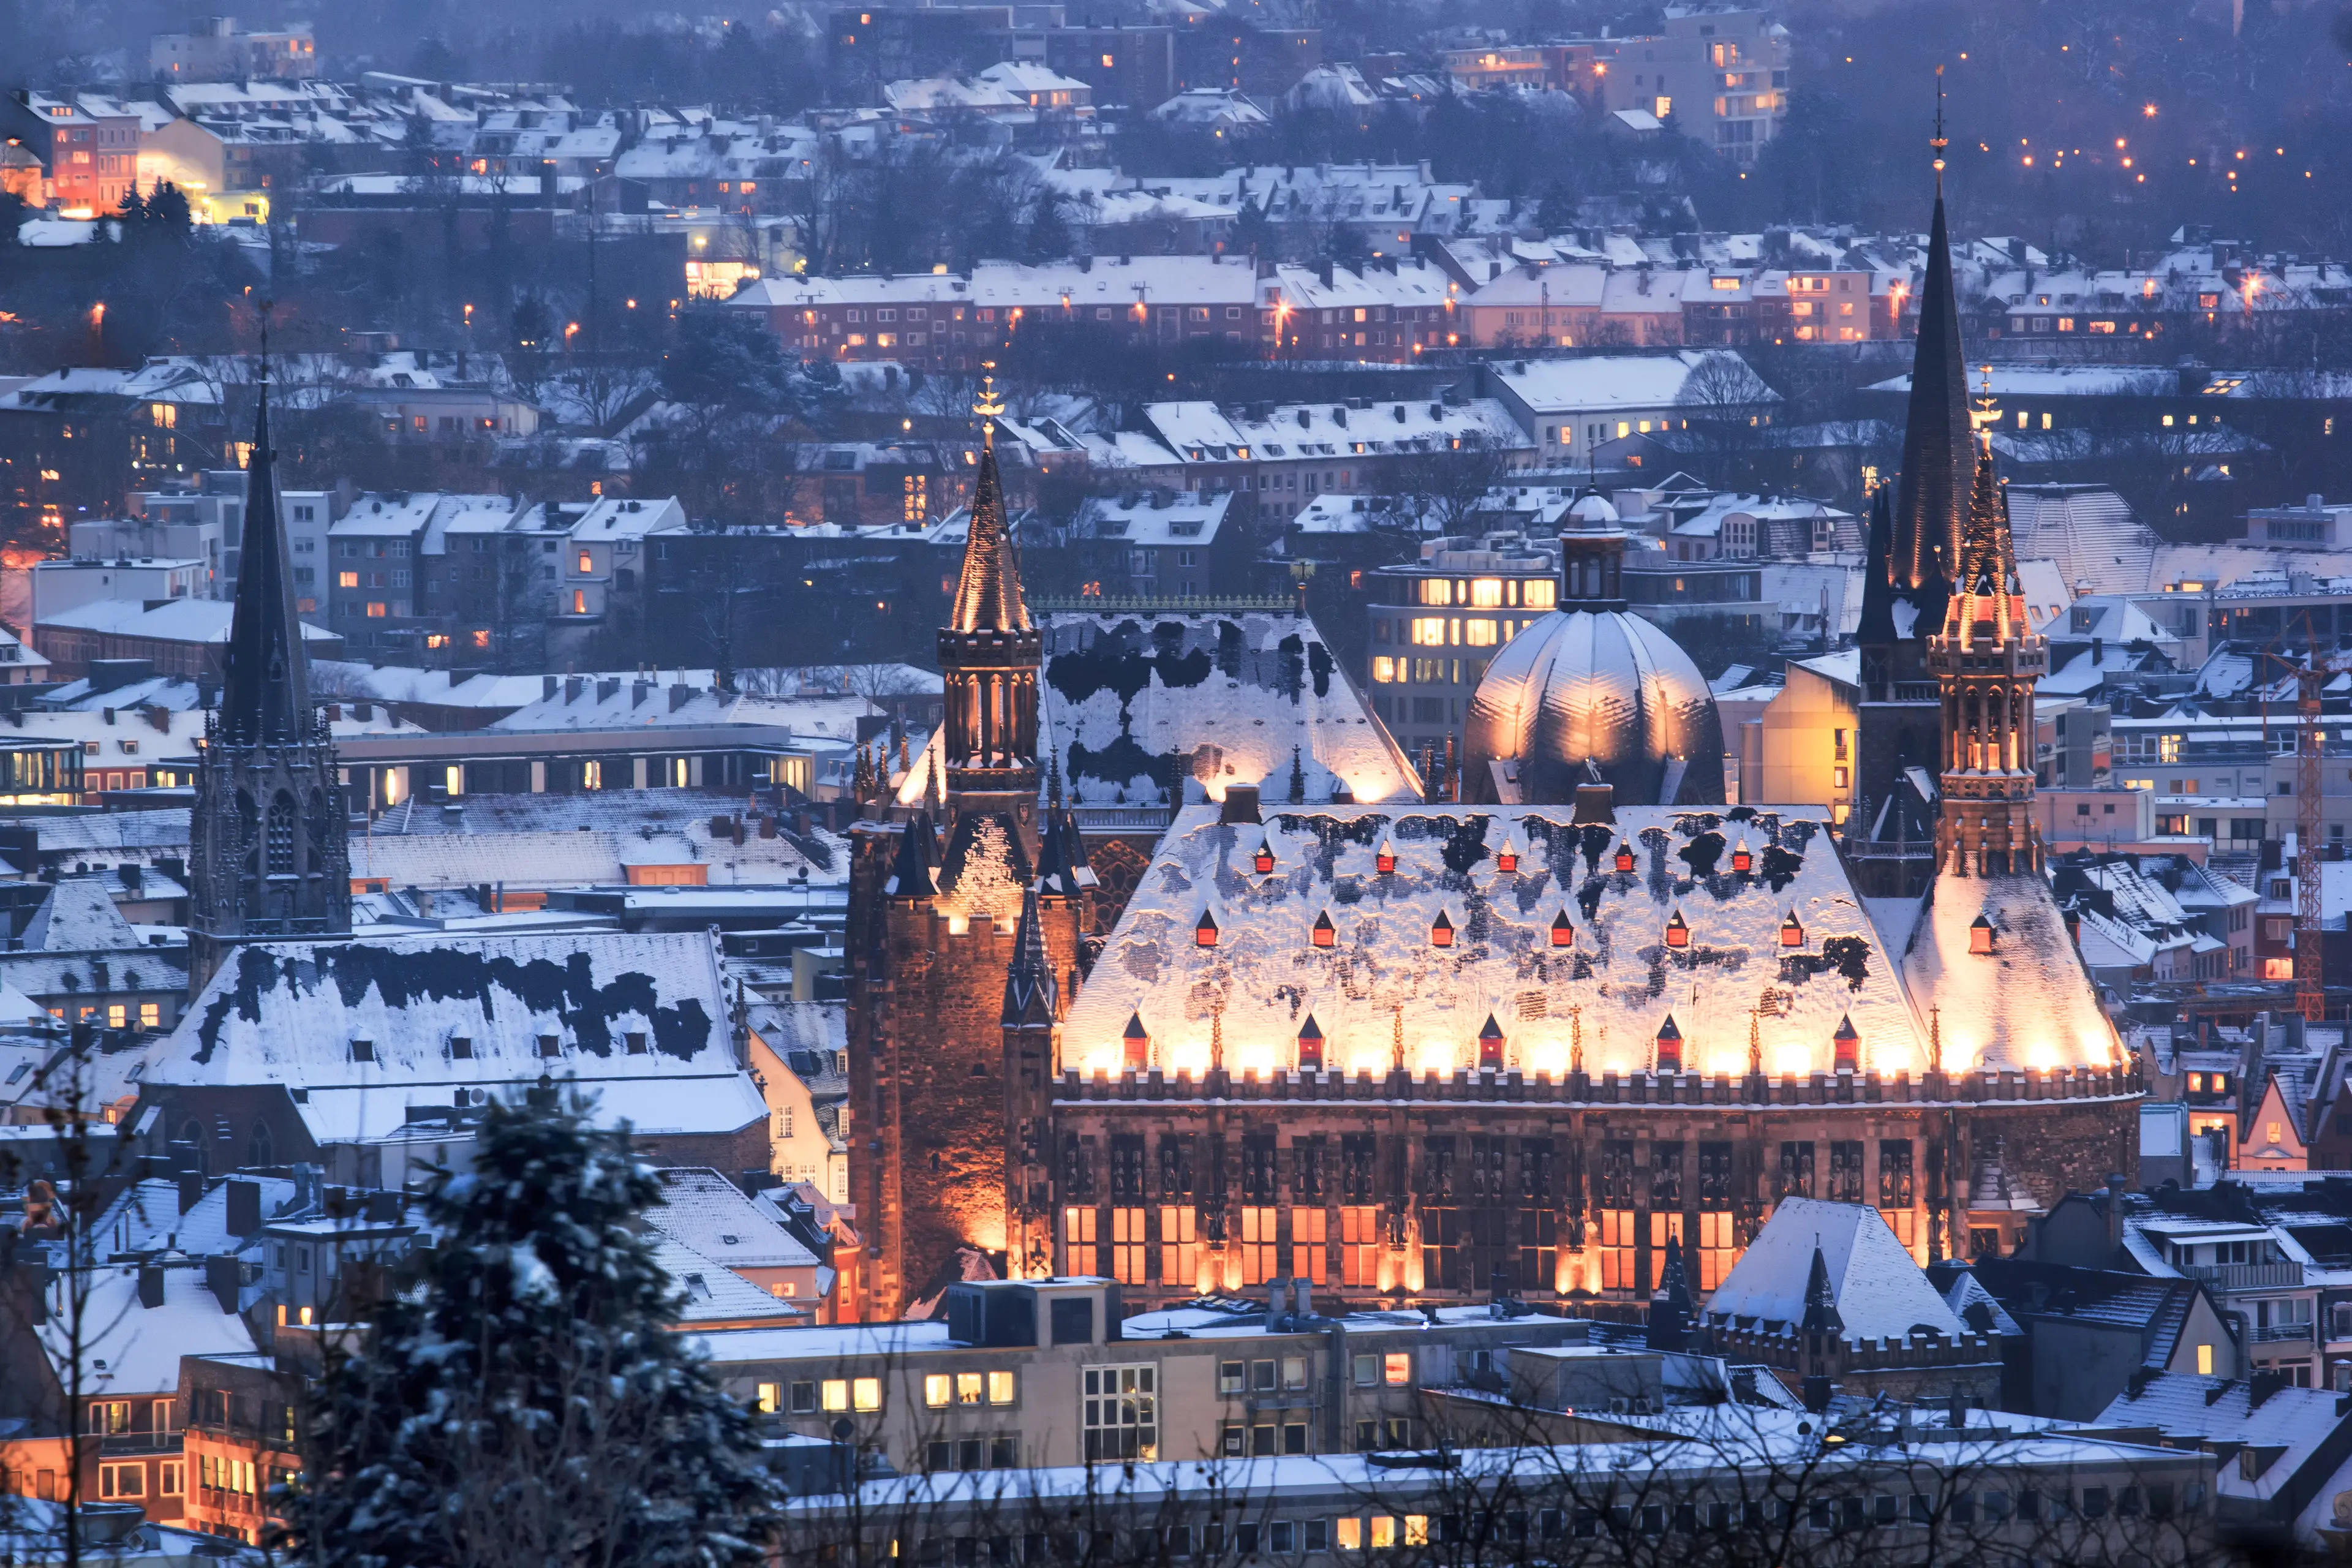 Christmas market at Aachen Cathedral in the evening